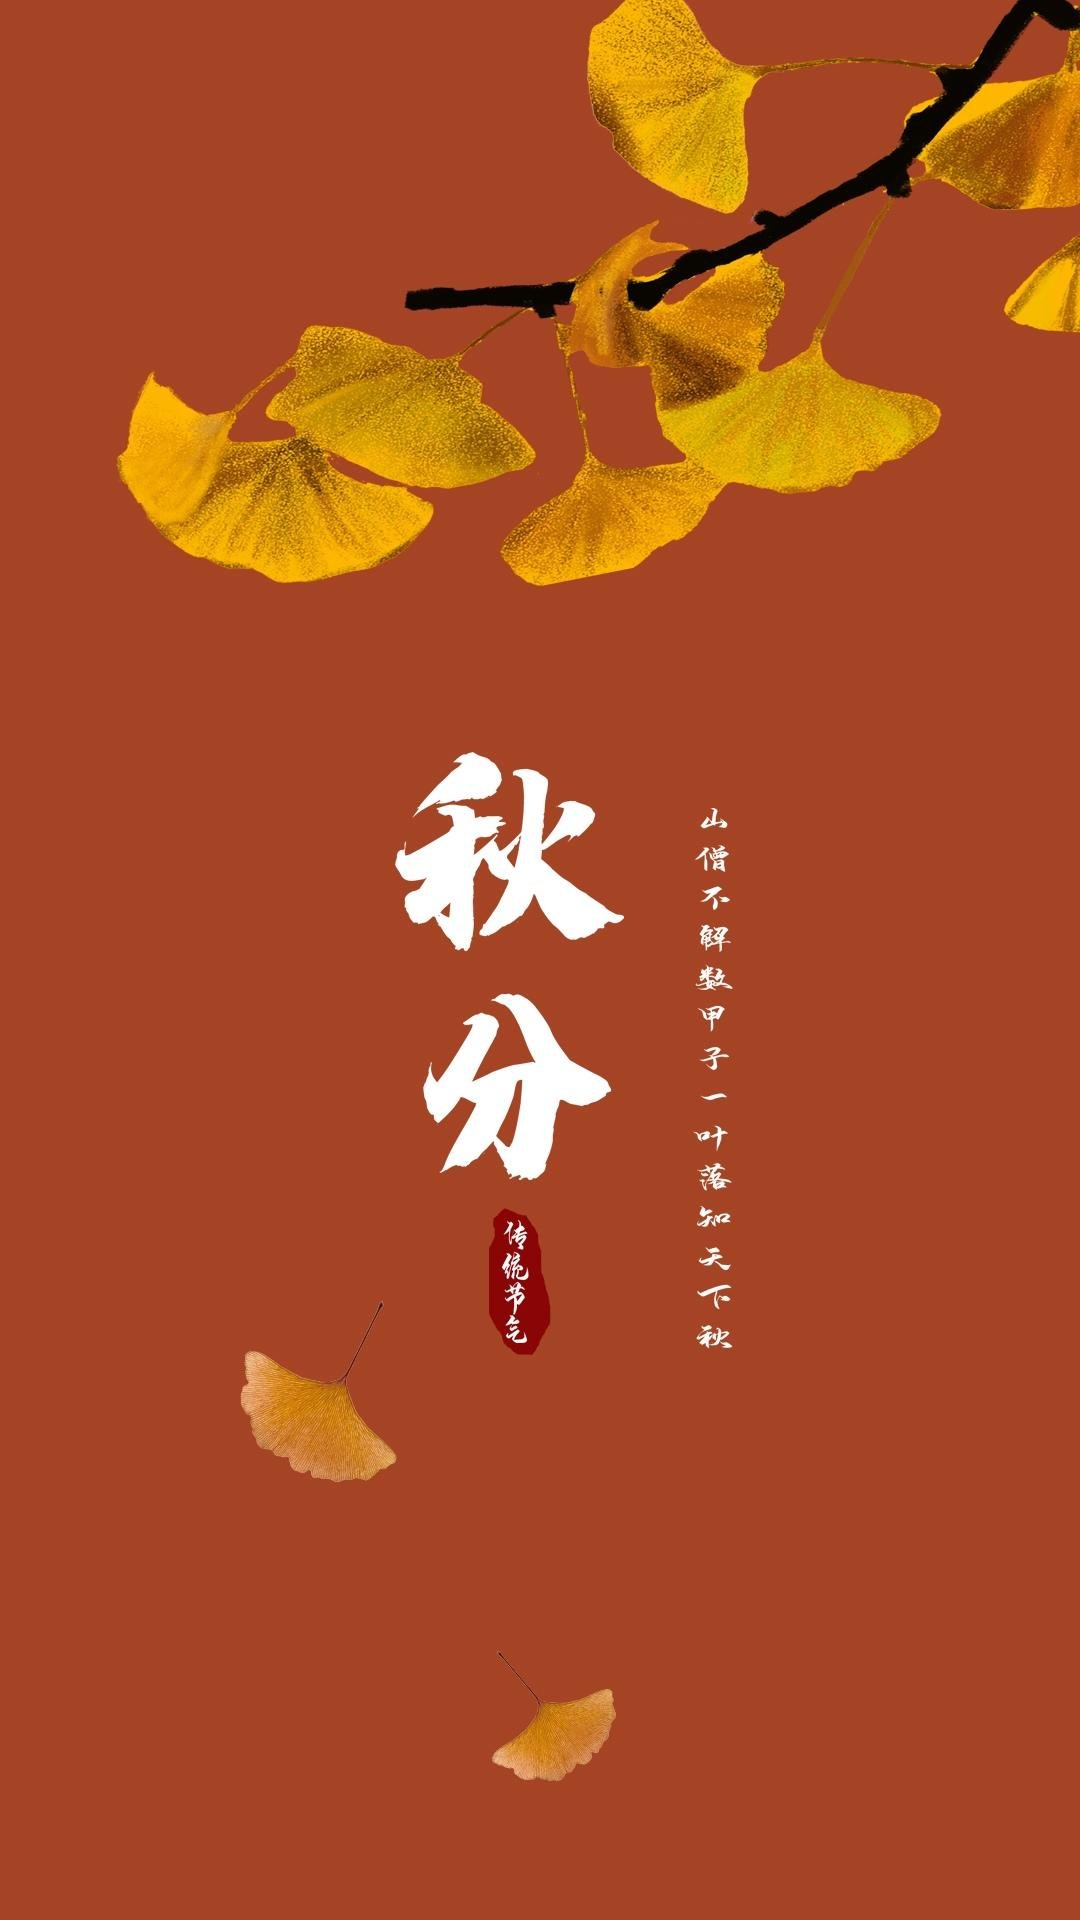 Nature Seasons Leaves Vertical Minimalism Chinese Characters 1080x1920